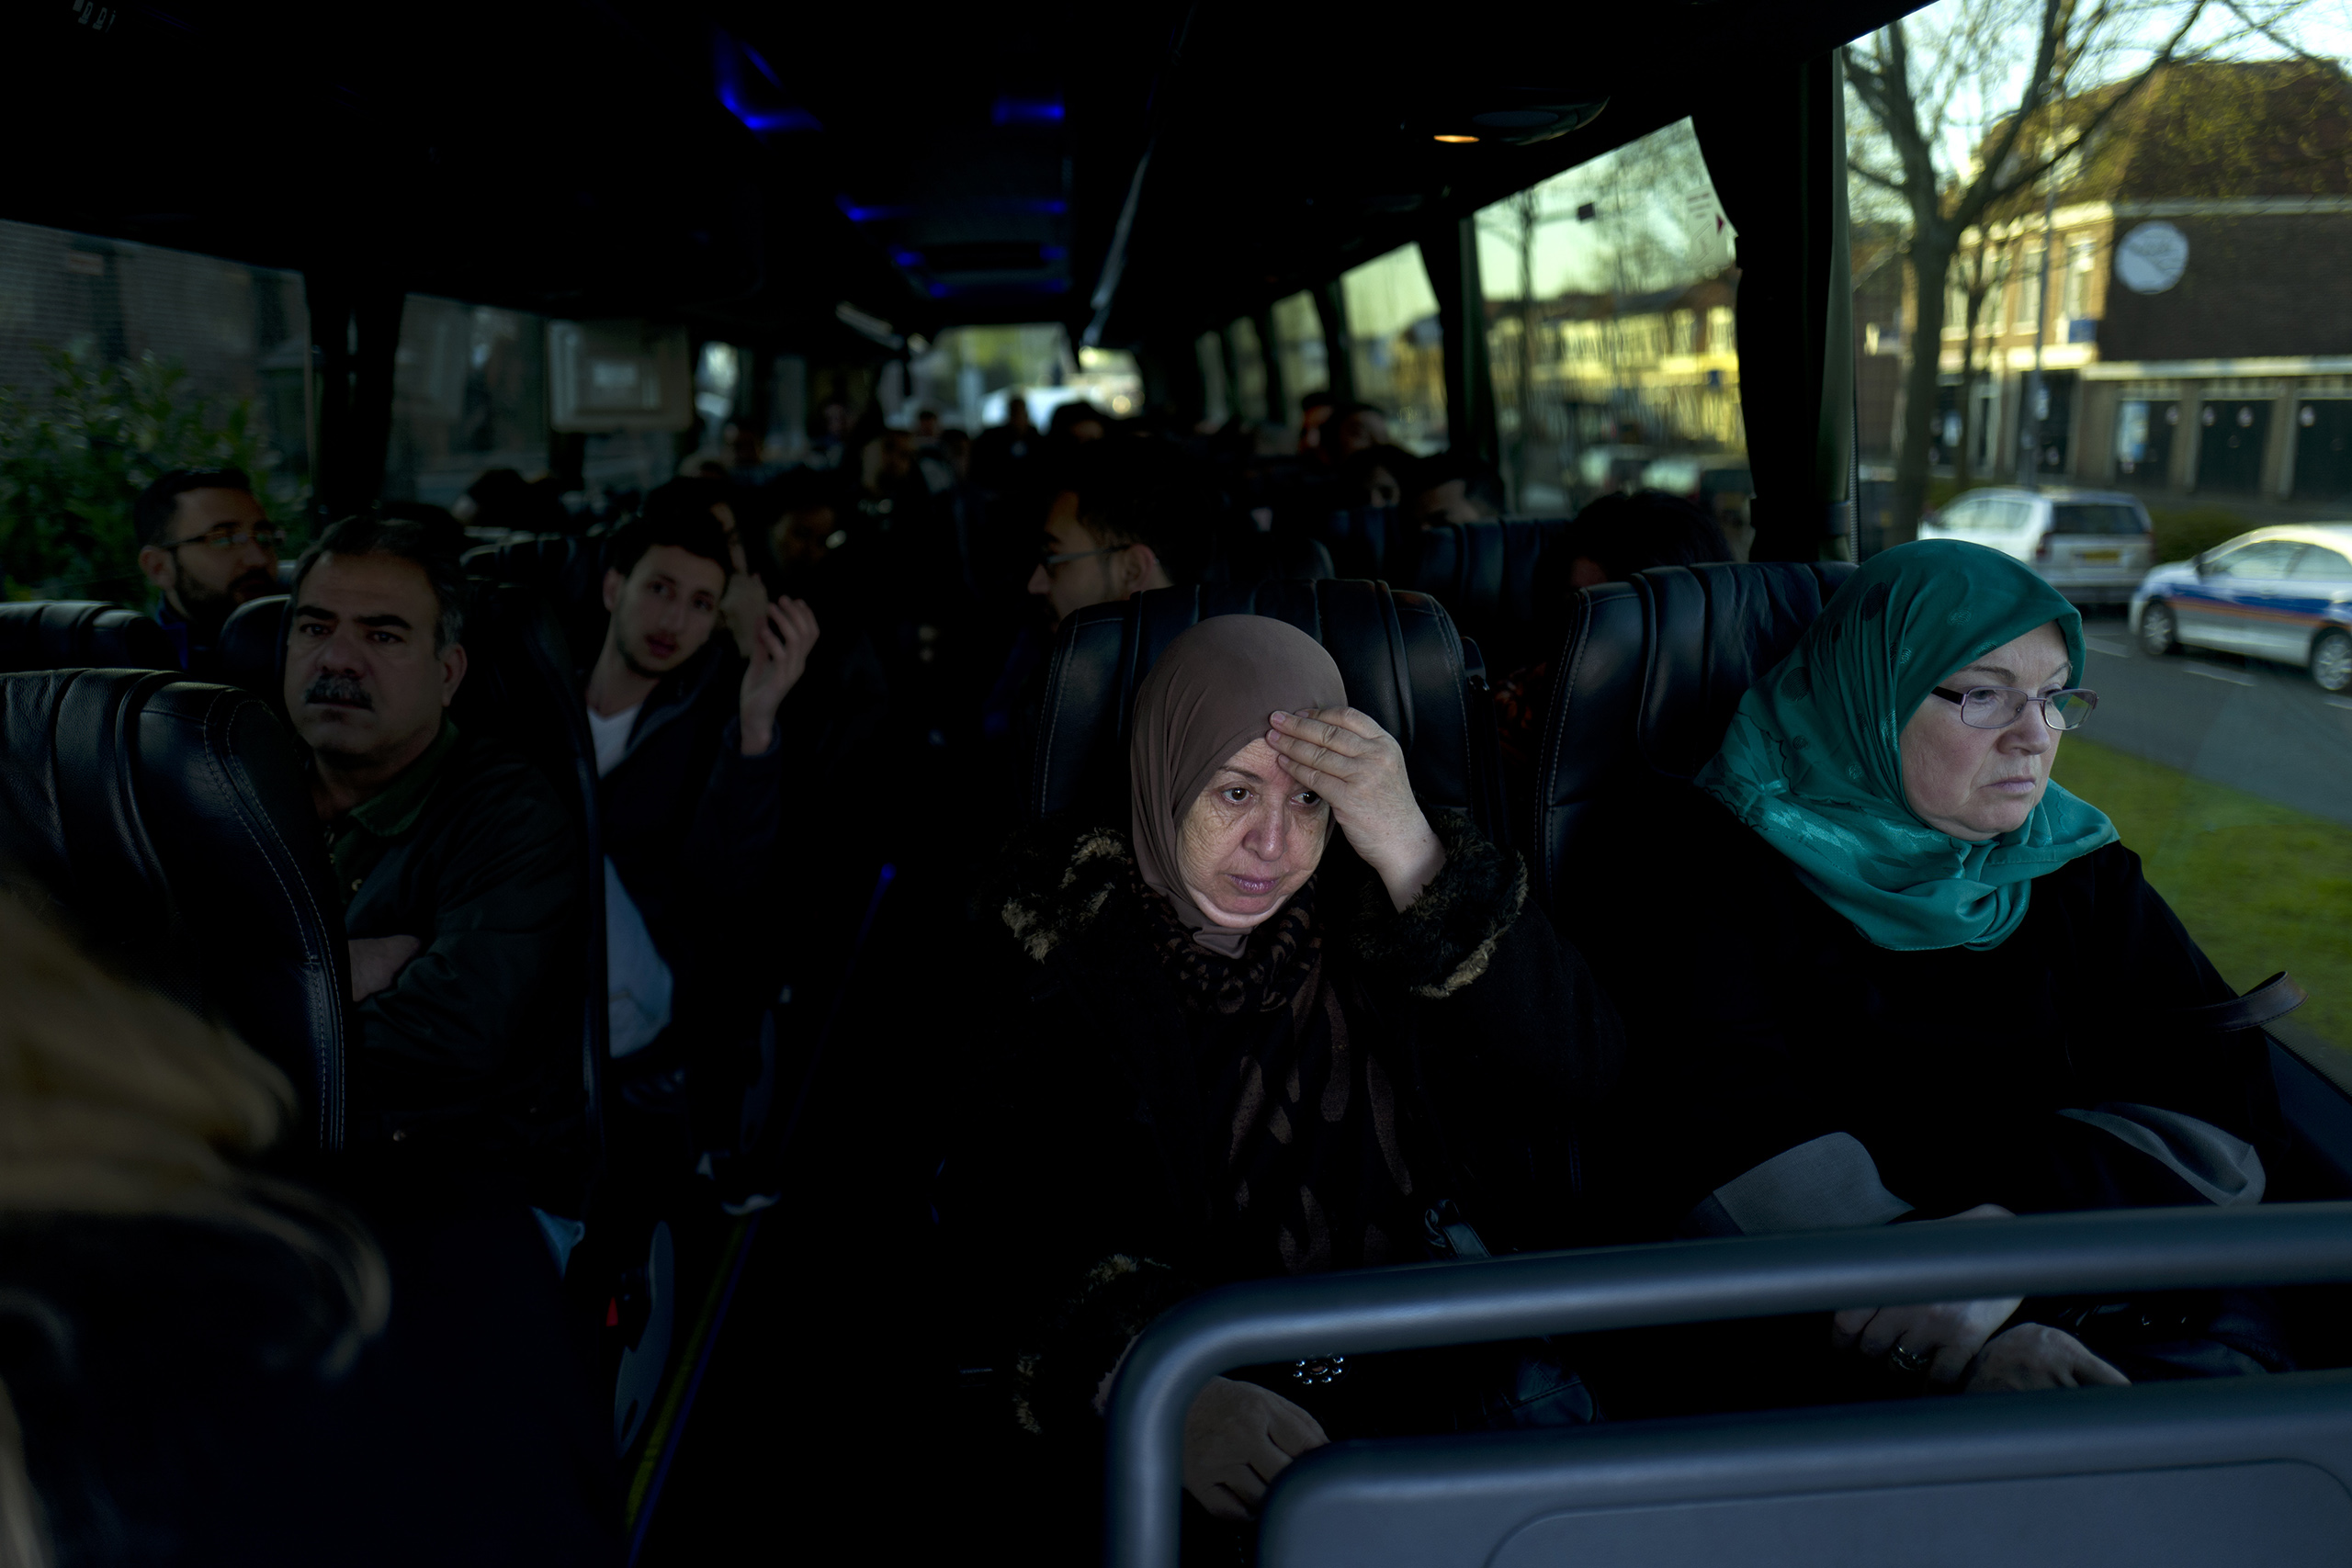 Iraqi refugee Fatima Hussein, 65, reacts while she and others wait in a bus heading to government interviews for their asylum-seeking process outside the former prison of De Koepel in Haarlem, Netherlands, May 6, 2016.